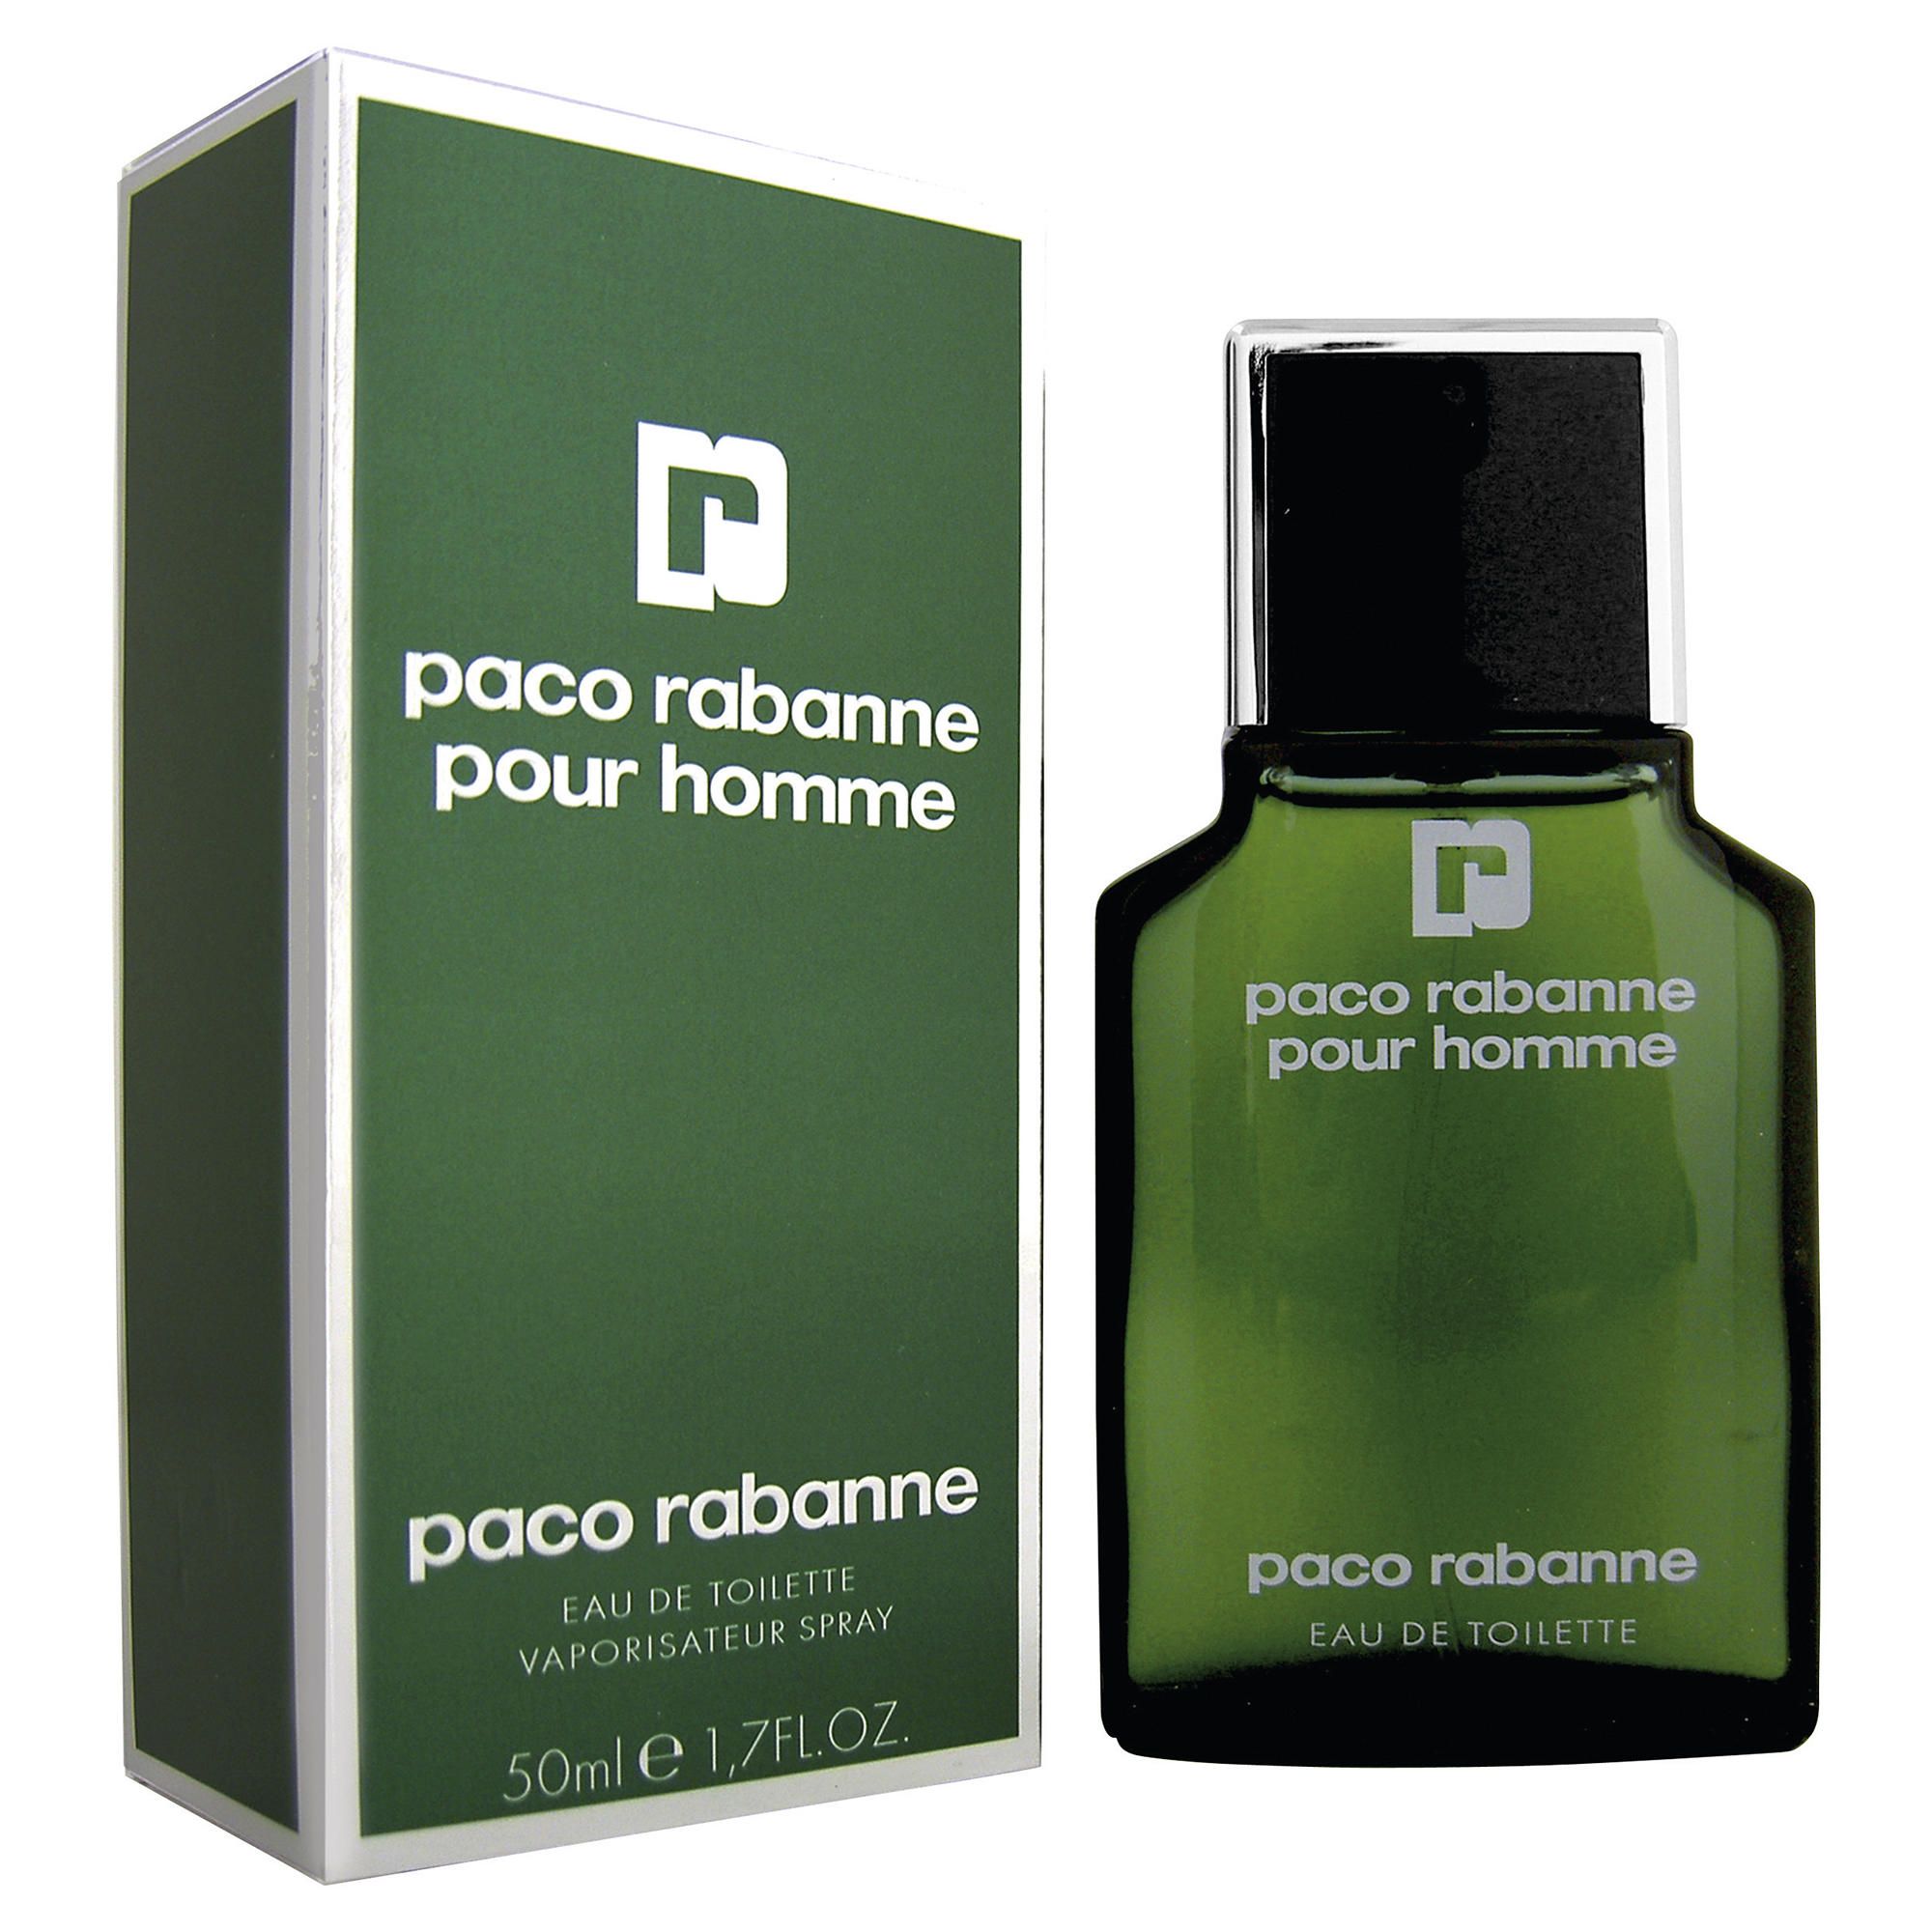 Paco pour homme. Paco Rabanne pour homme 100 мл. Одеколон Paco Rabanne тестер. Paco Rabanne мужские pour Home. Paco Rabanne pour homme EDT 100ml.